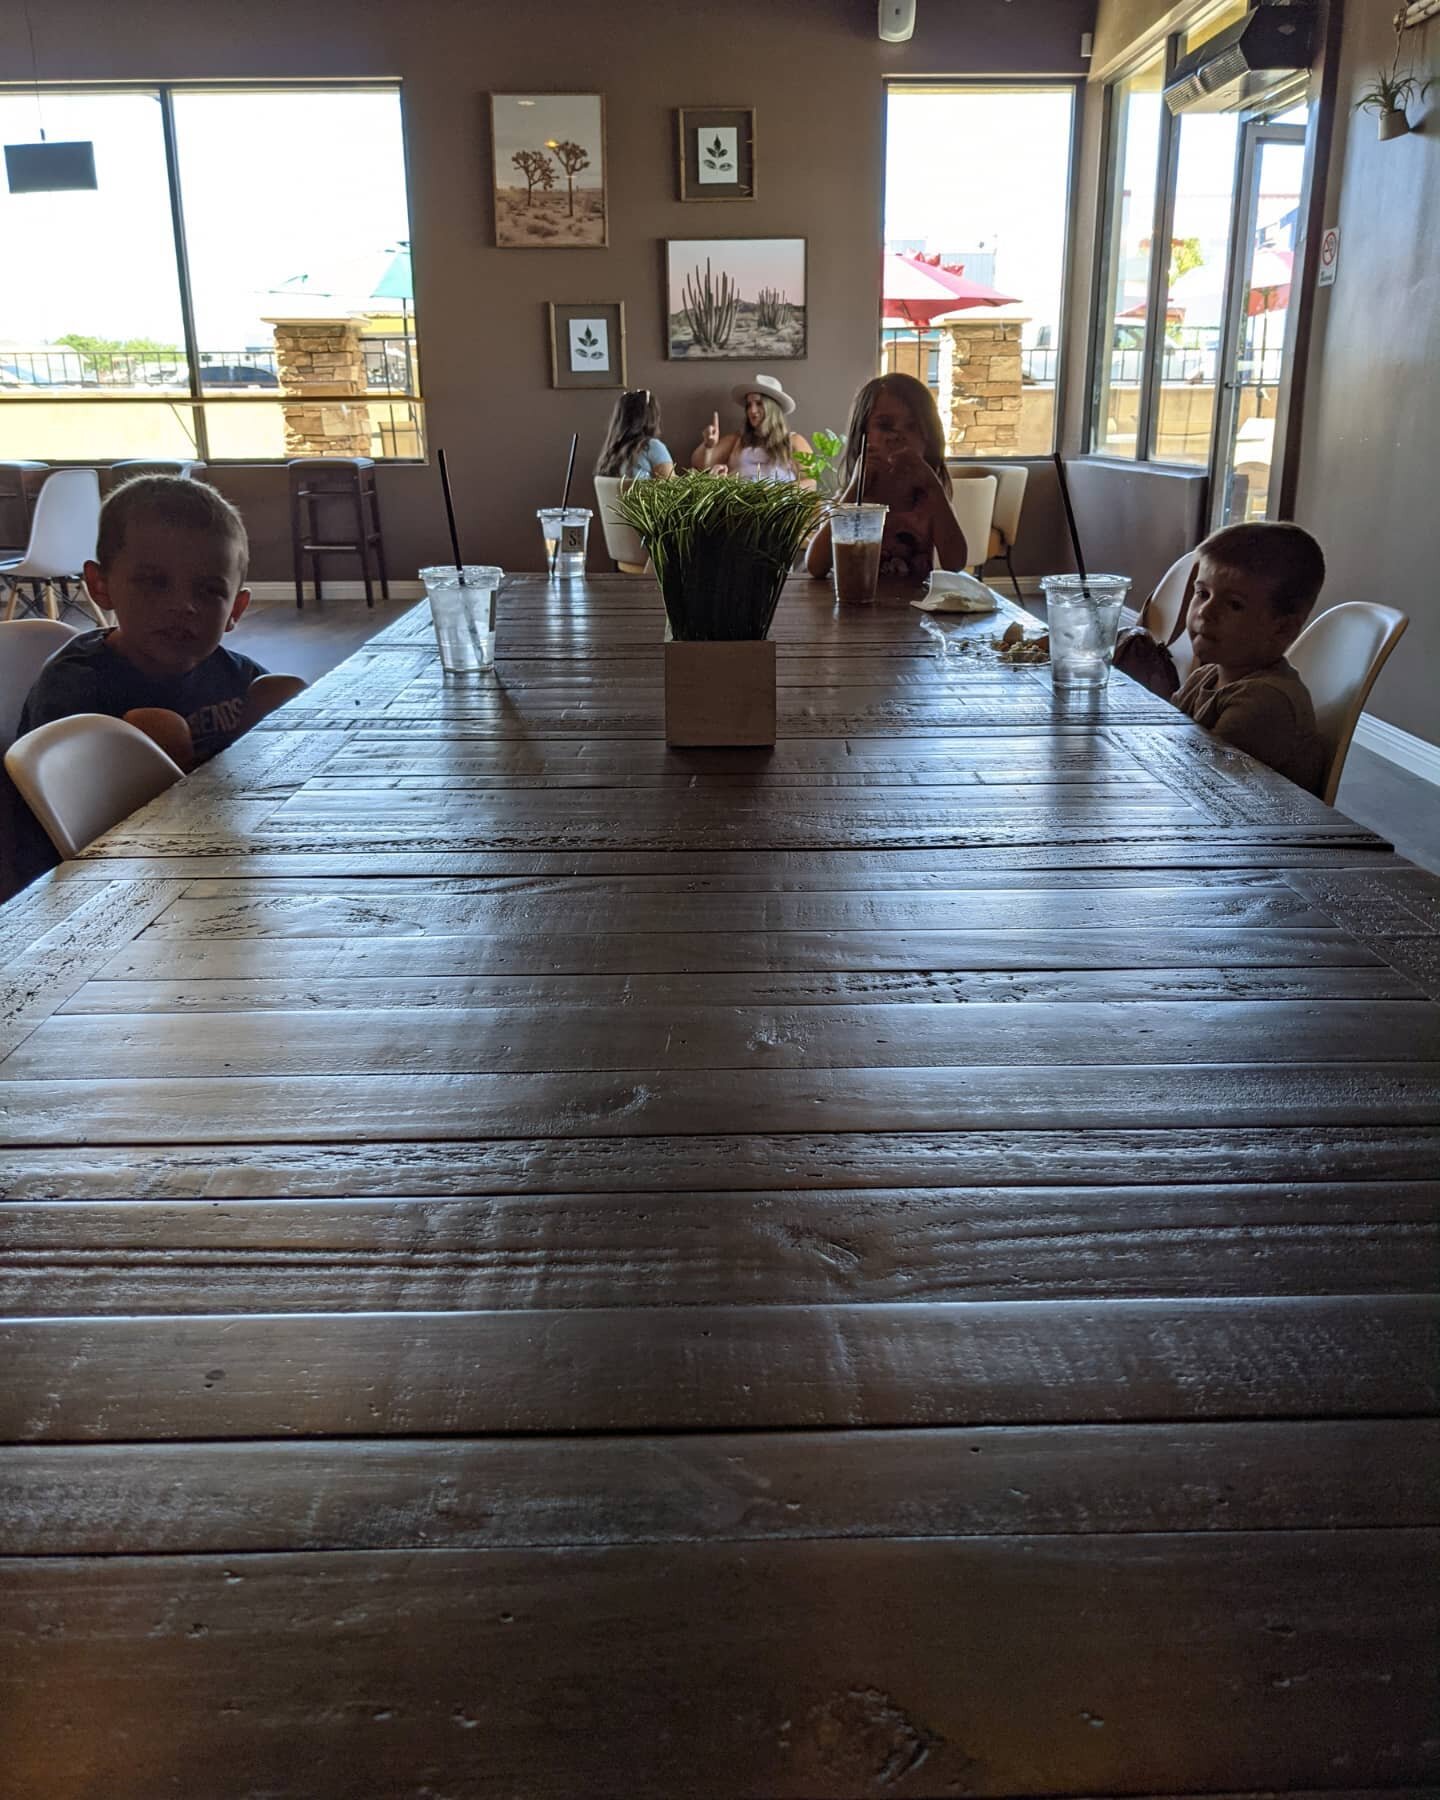 Ever go to a place and think, &quot;Yeah I can homeschool here&quot;?
.
Coffee places are my favorite and if they've got giant tables it definitely calls out homeschool to me 😁
.
Have you ever taken homeschool to go?
.
.
.
.
#homeschoolcollective #h